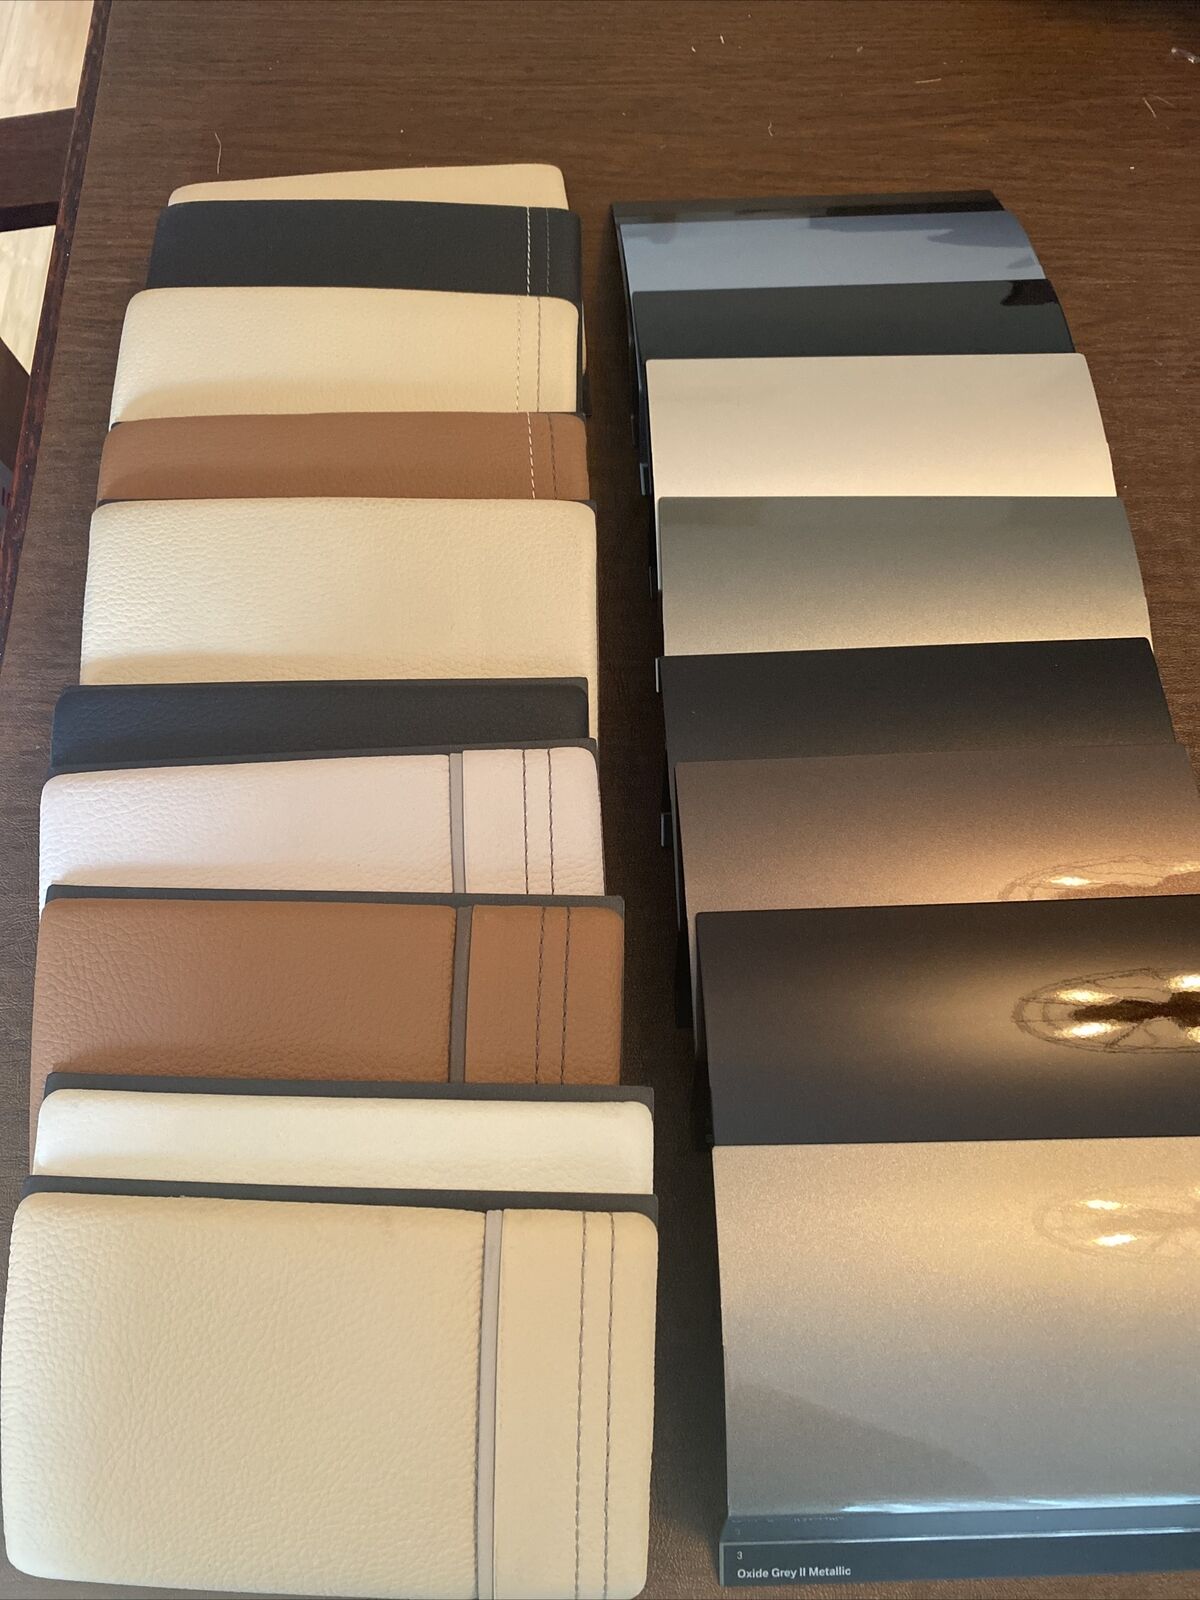 BMW 3 And 4 Series Dealer Build Swatches (Leather/Paint)